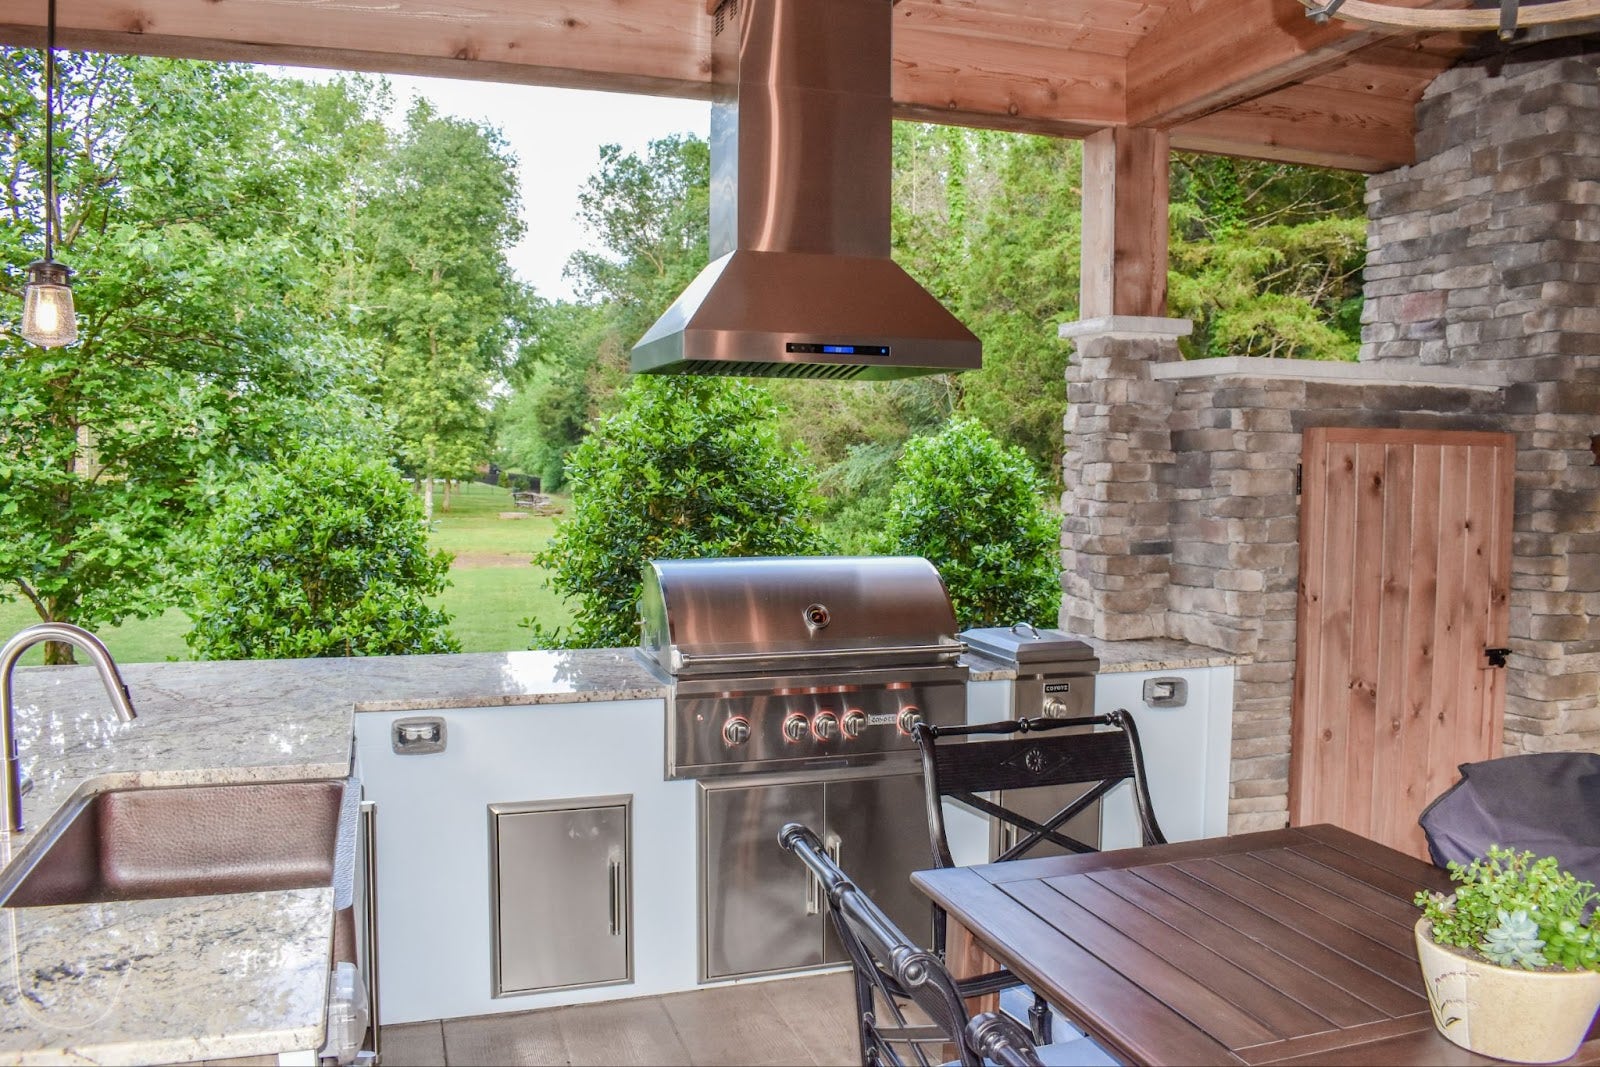 Rustic Meets Modern Grilling: Copper Proline hood adds style and function to this outdoor kitchen. Natural materials and a garden view create a serene space for gourmet grilling. - Proline Range Hoods - prolinerangehoods.com 